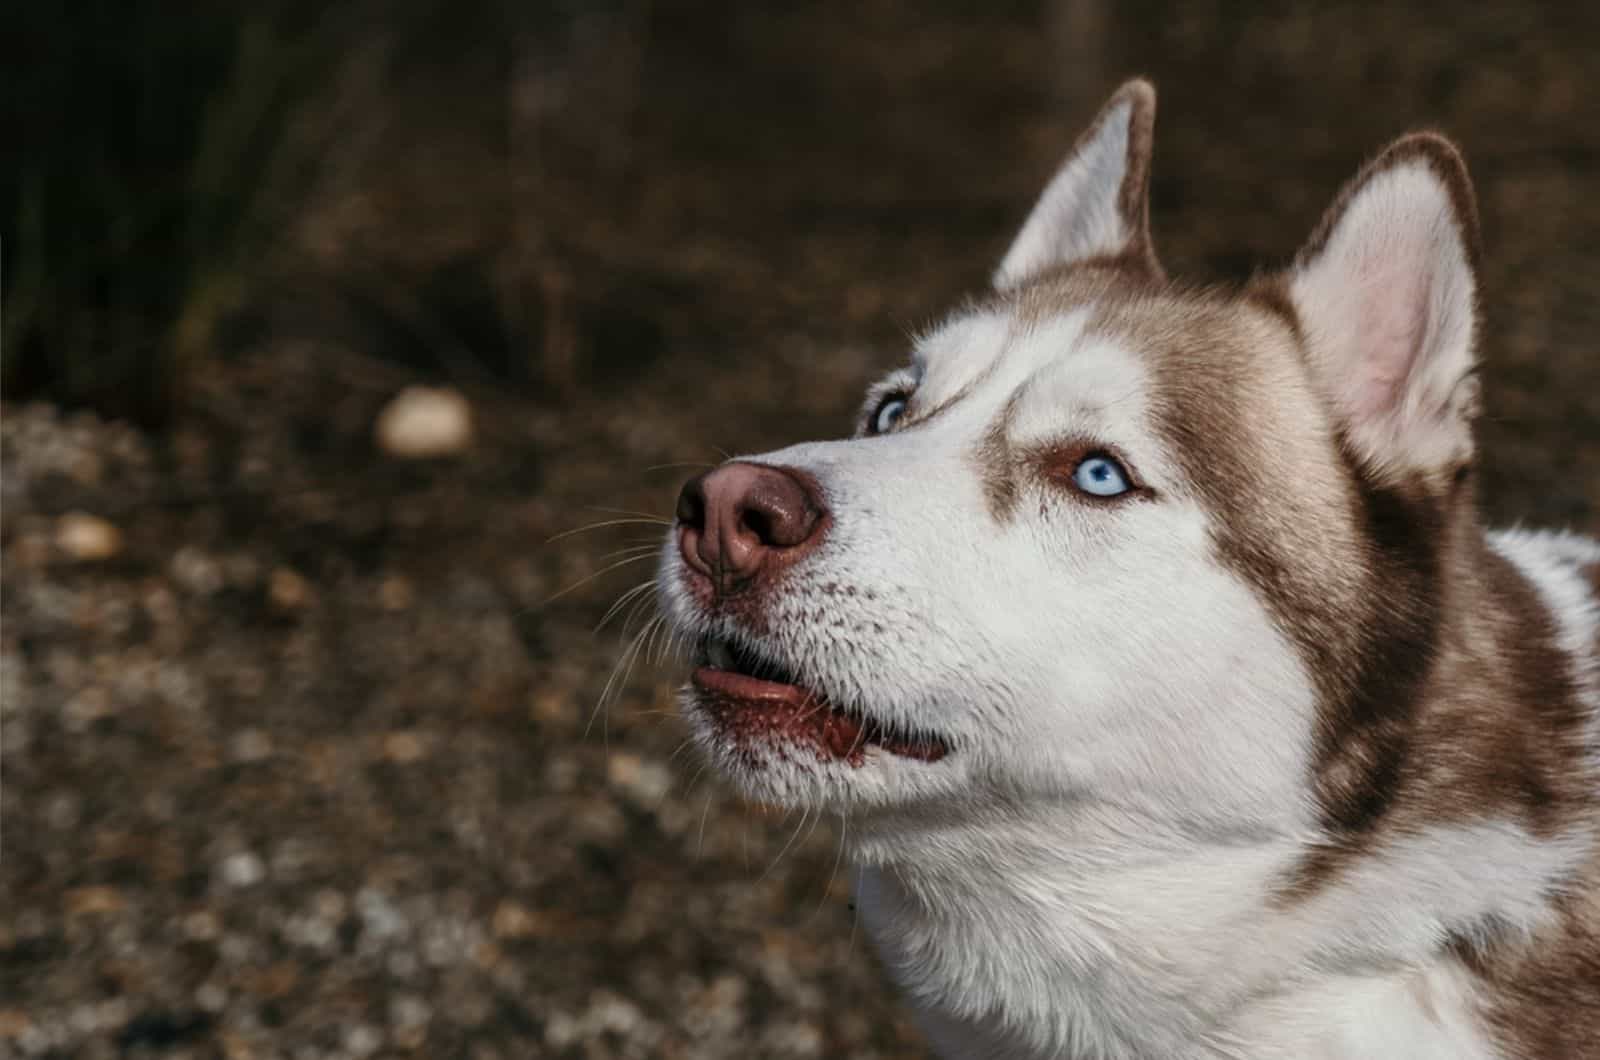 husky looking past the camera